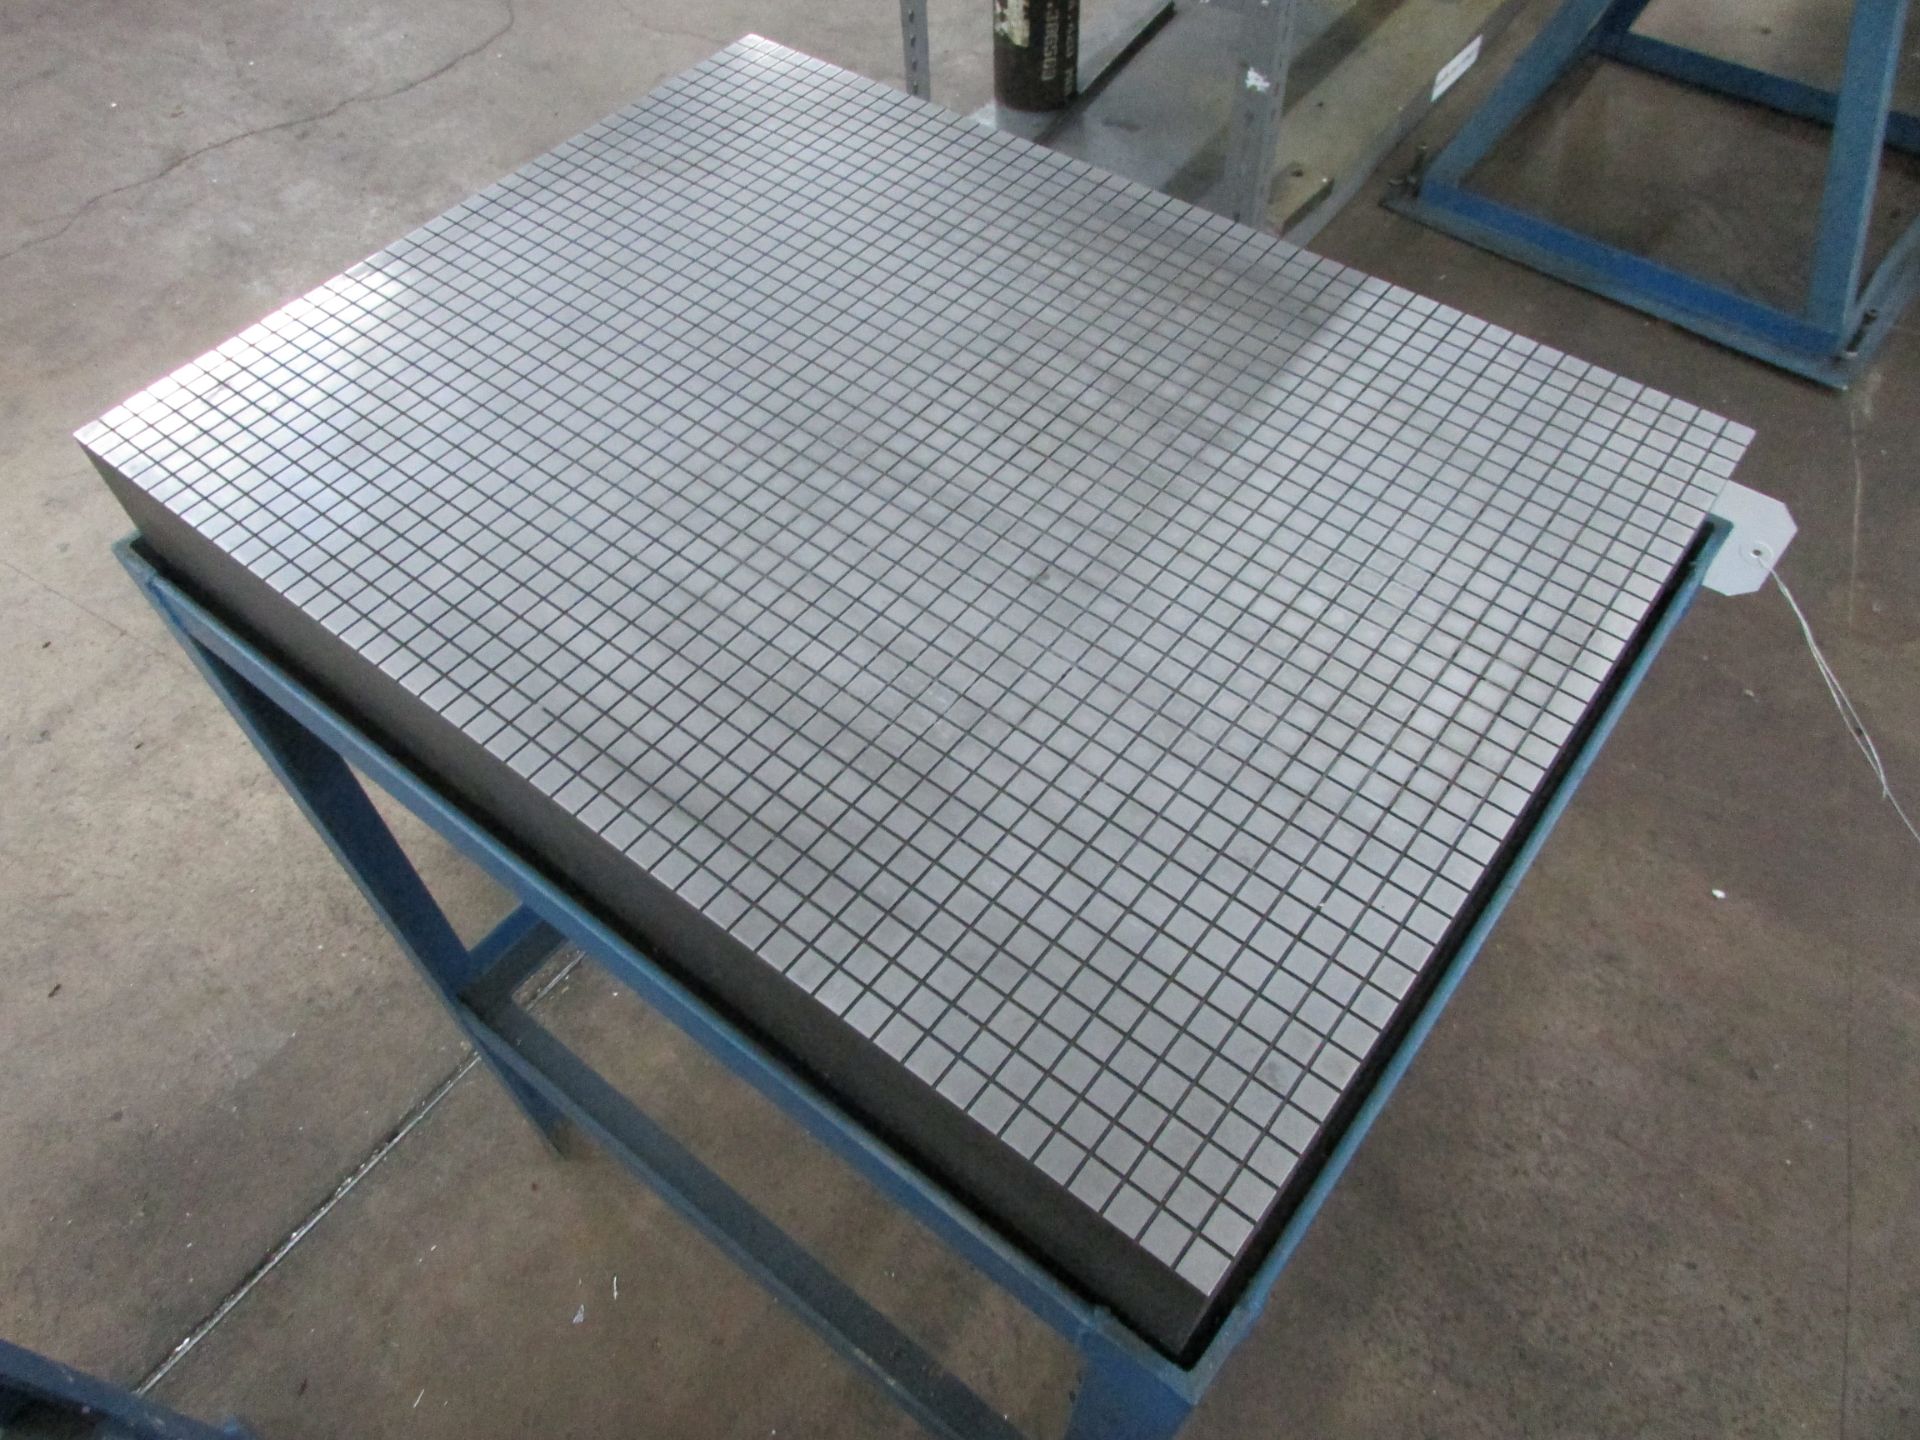 24"x18"x4" Precision Steel Top Machinist Table - Image 4 of 4